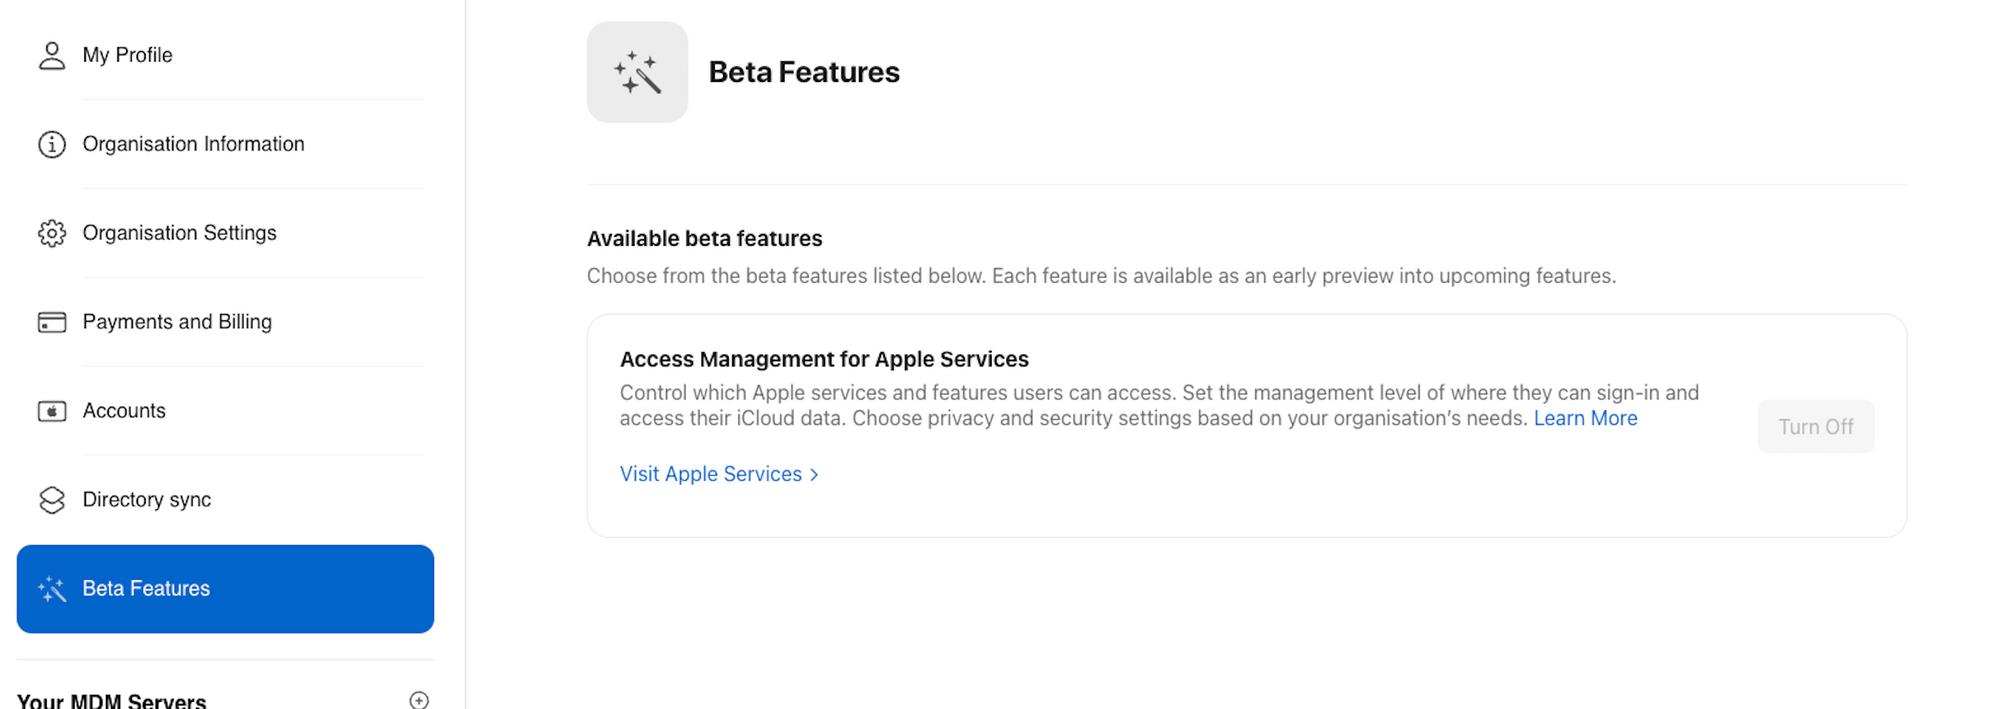 Extending Access Management for Apple Services: Beyond Federated Authentication